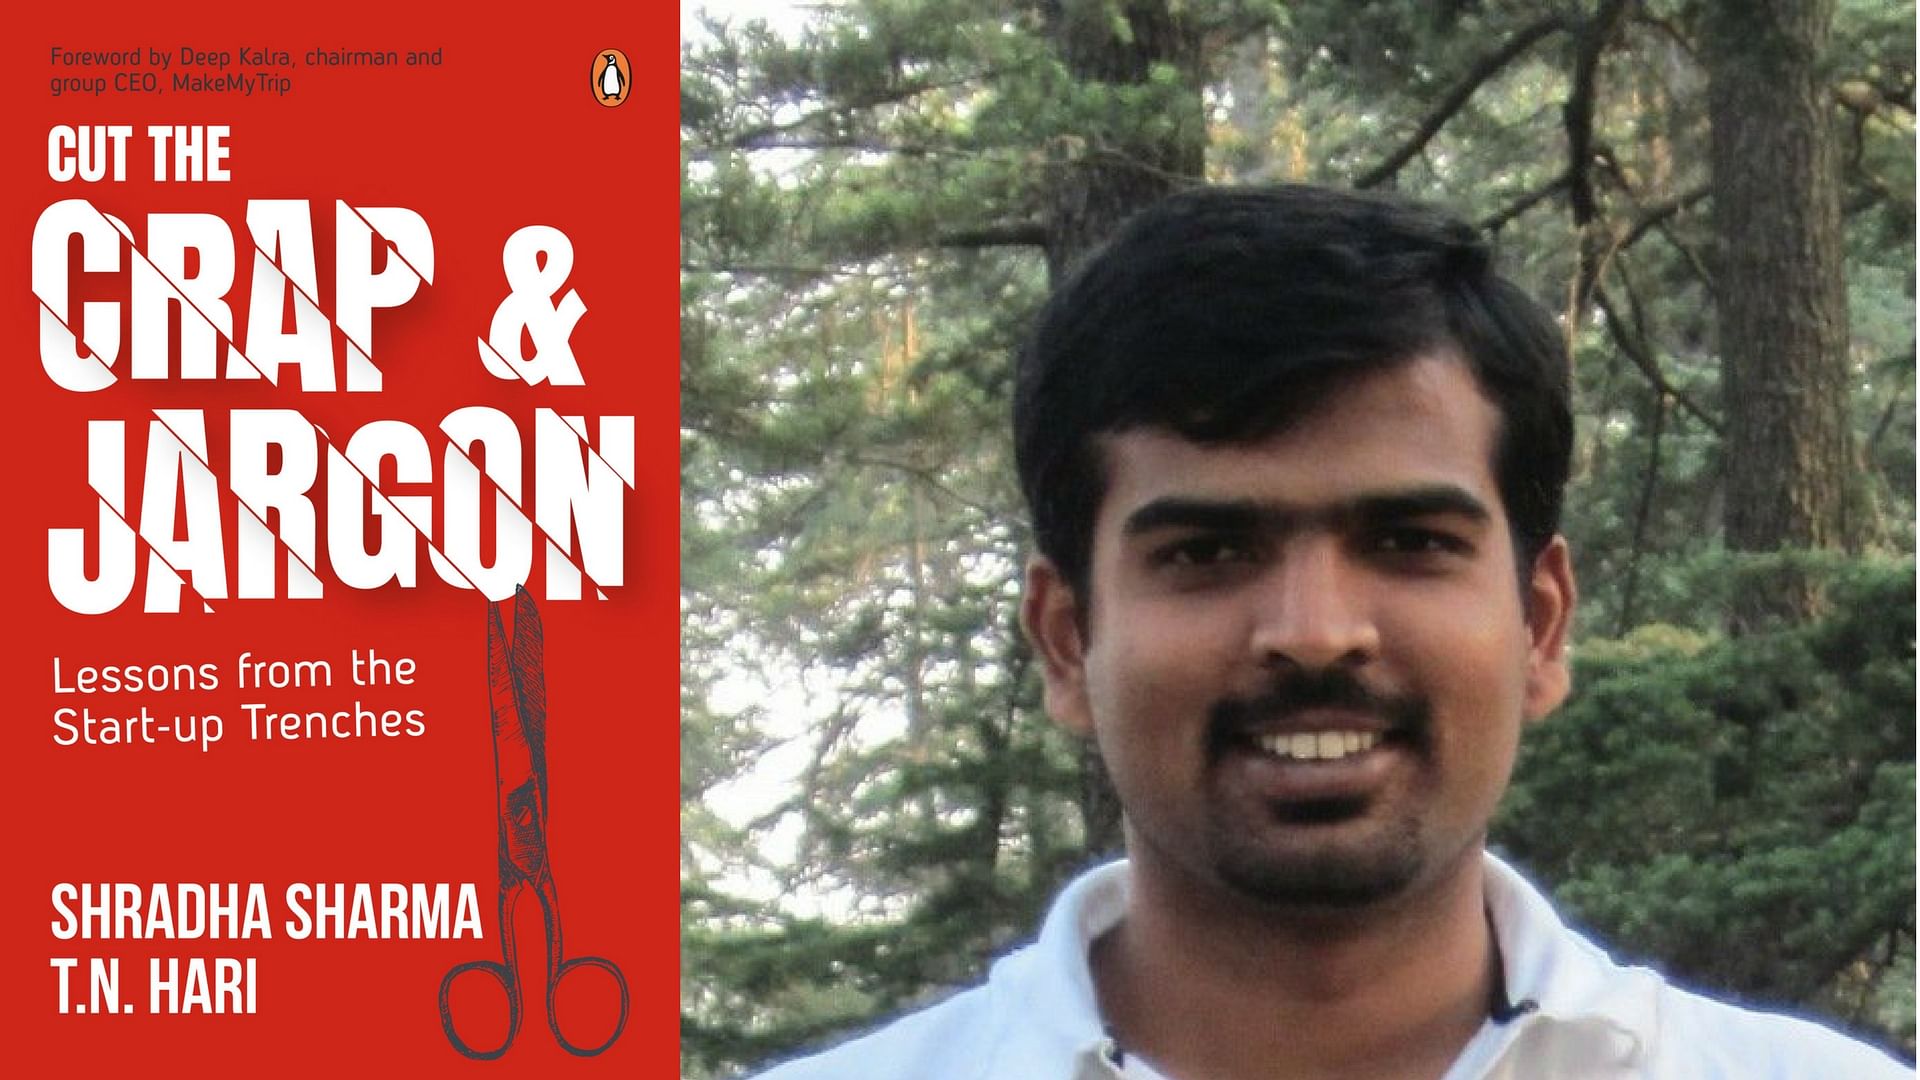 The writer talks about his experience working with Raghunandan G, Taxi For Sure founder (R).